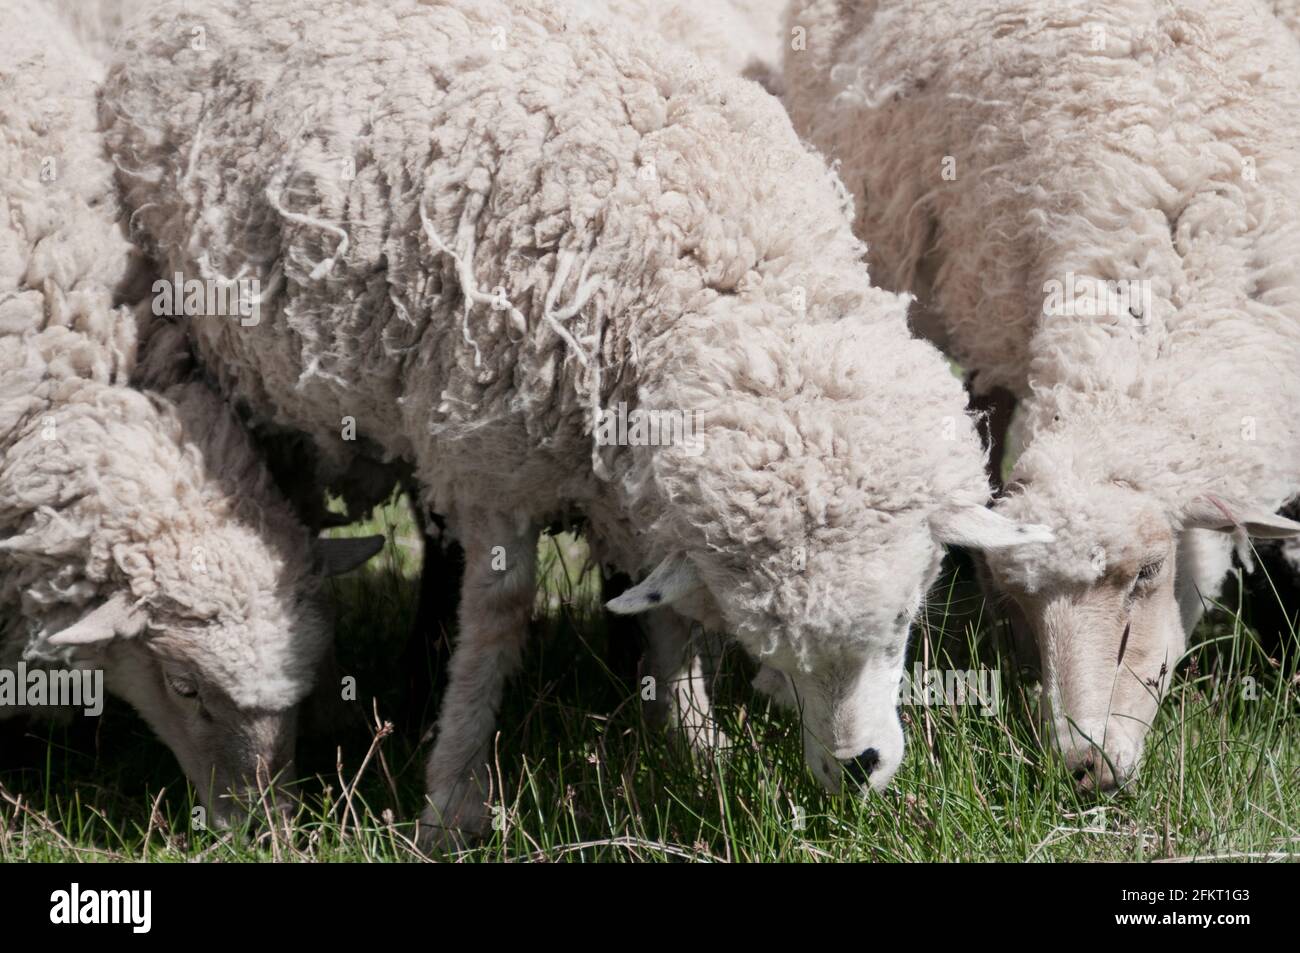 A herd of sheep in Yavi, Jujuy, Argentina Stock Photo